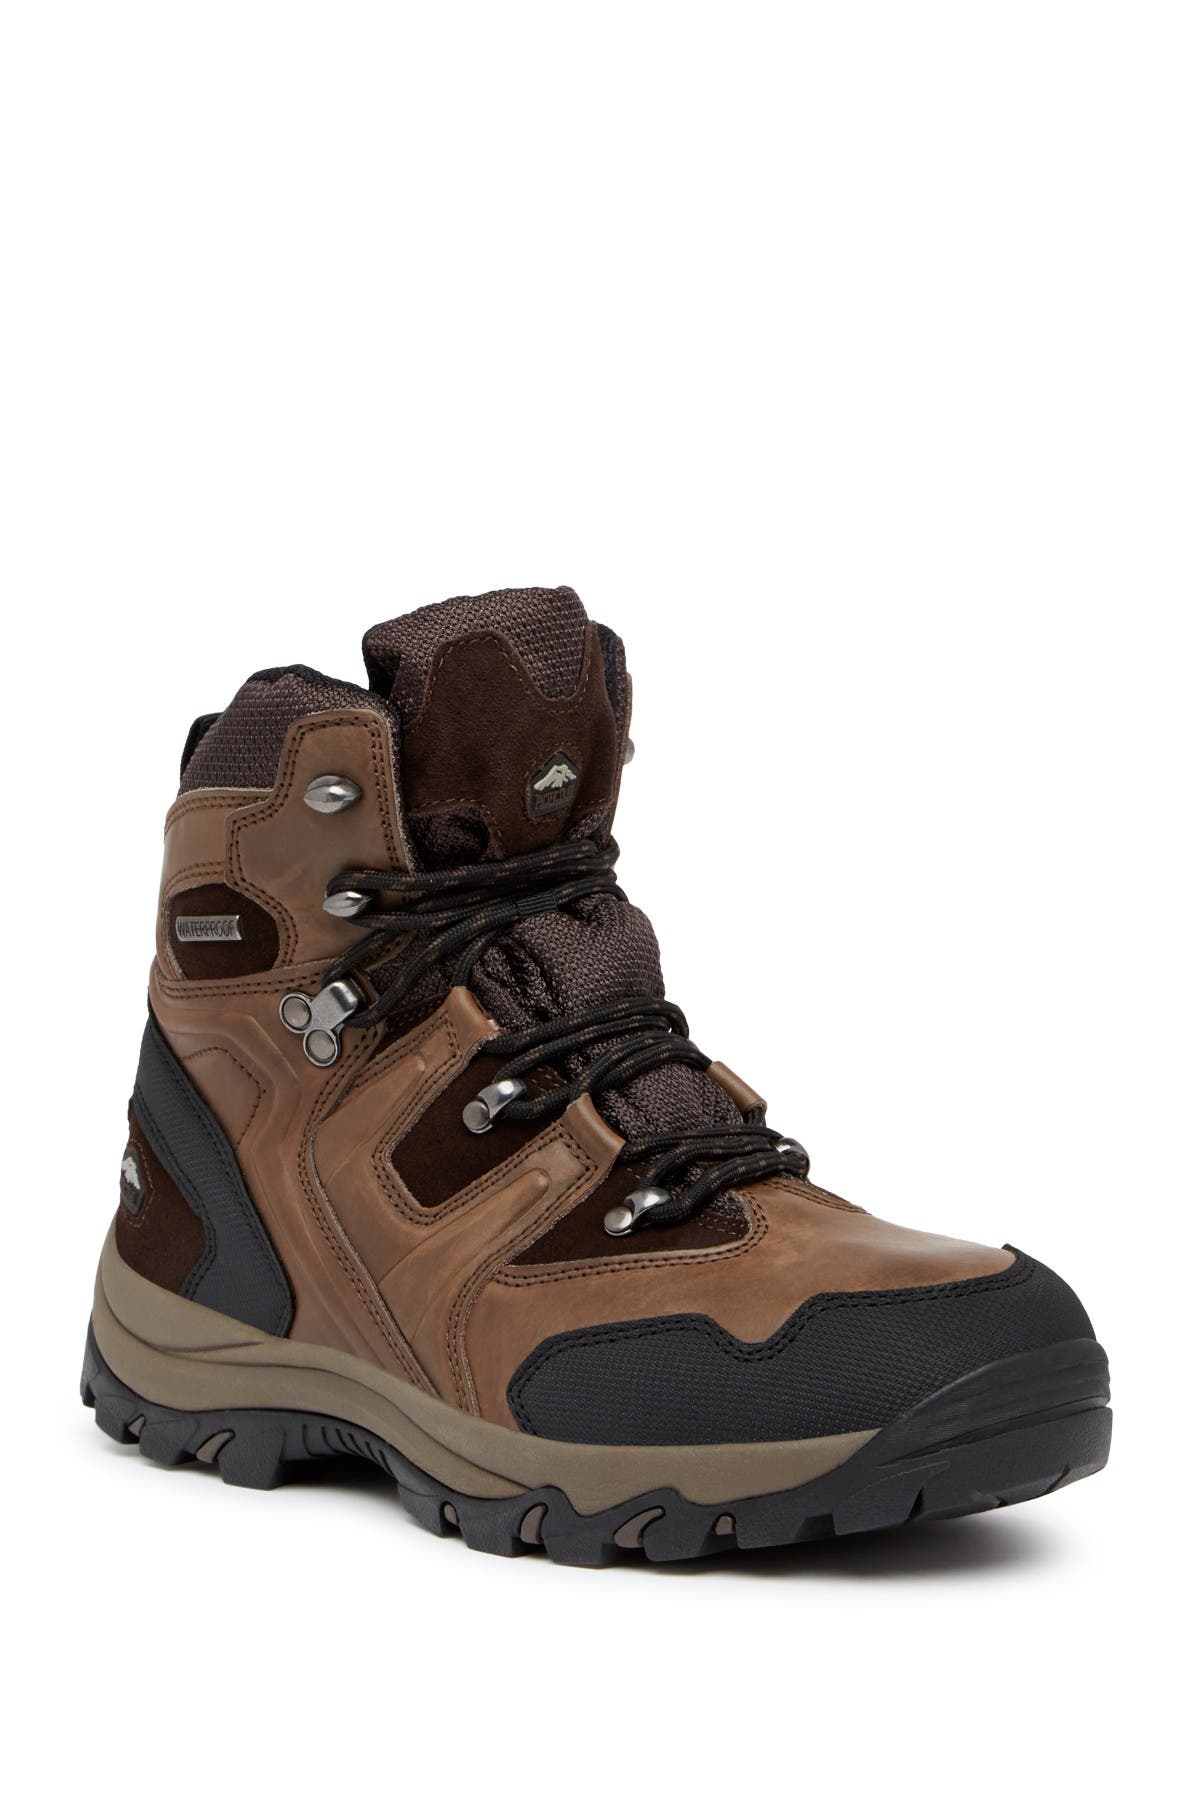 pacific trail hiking boots